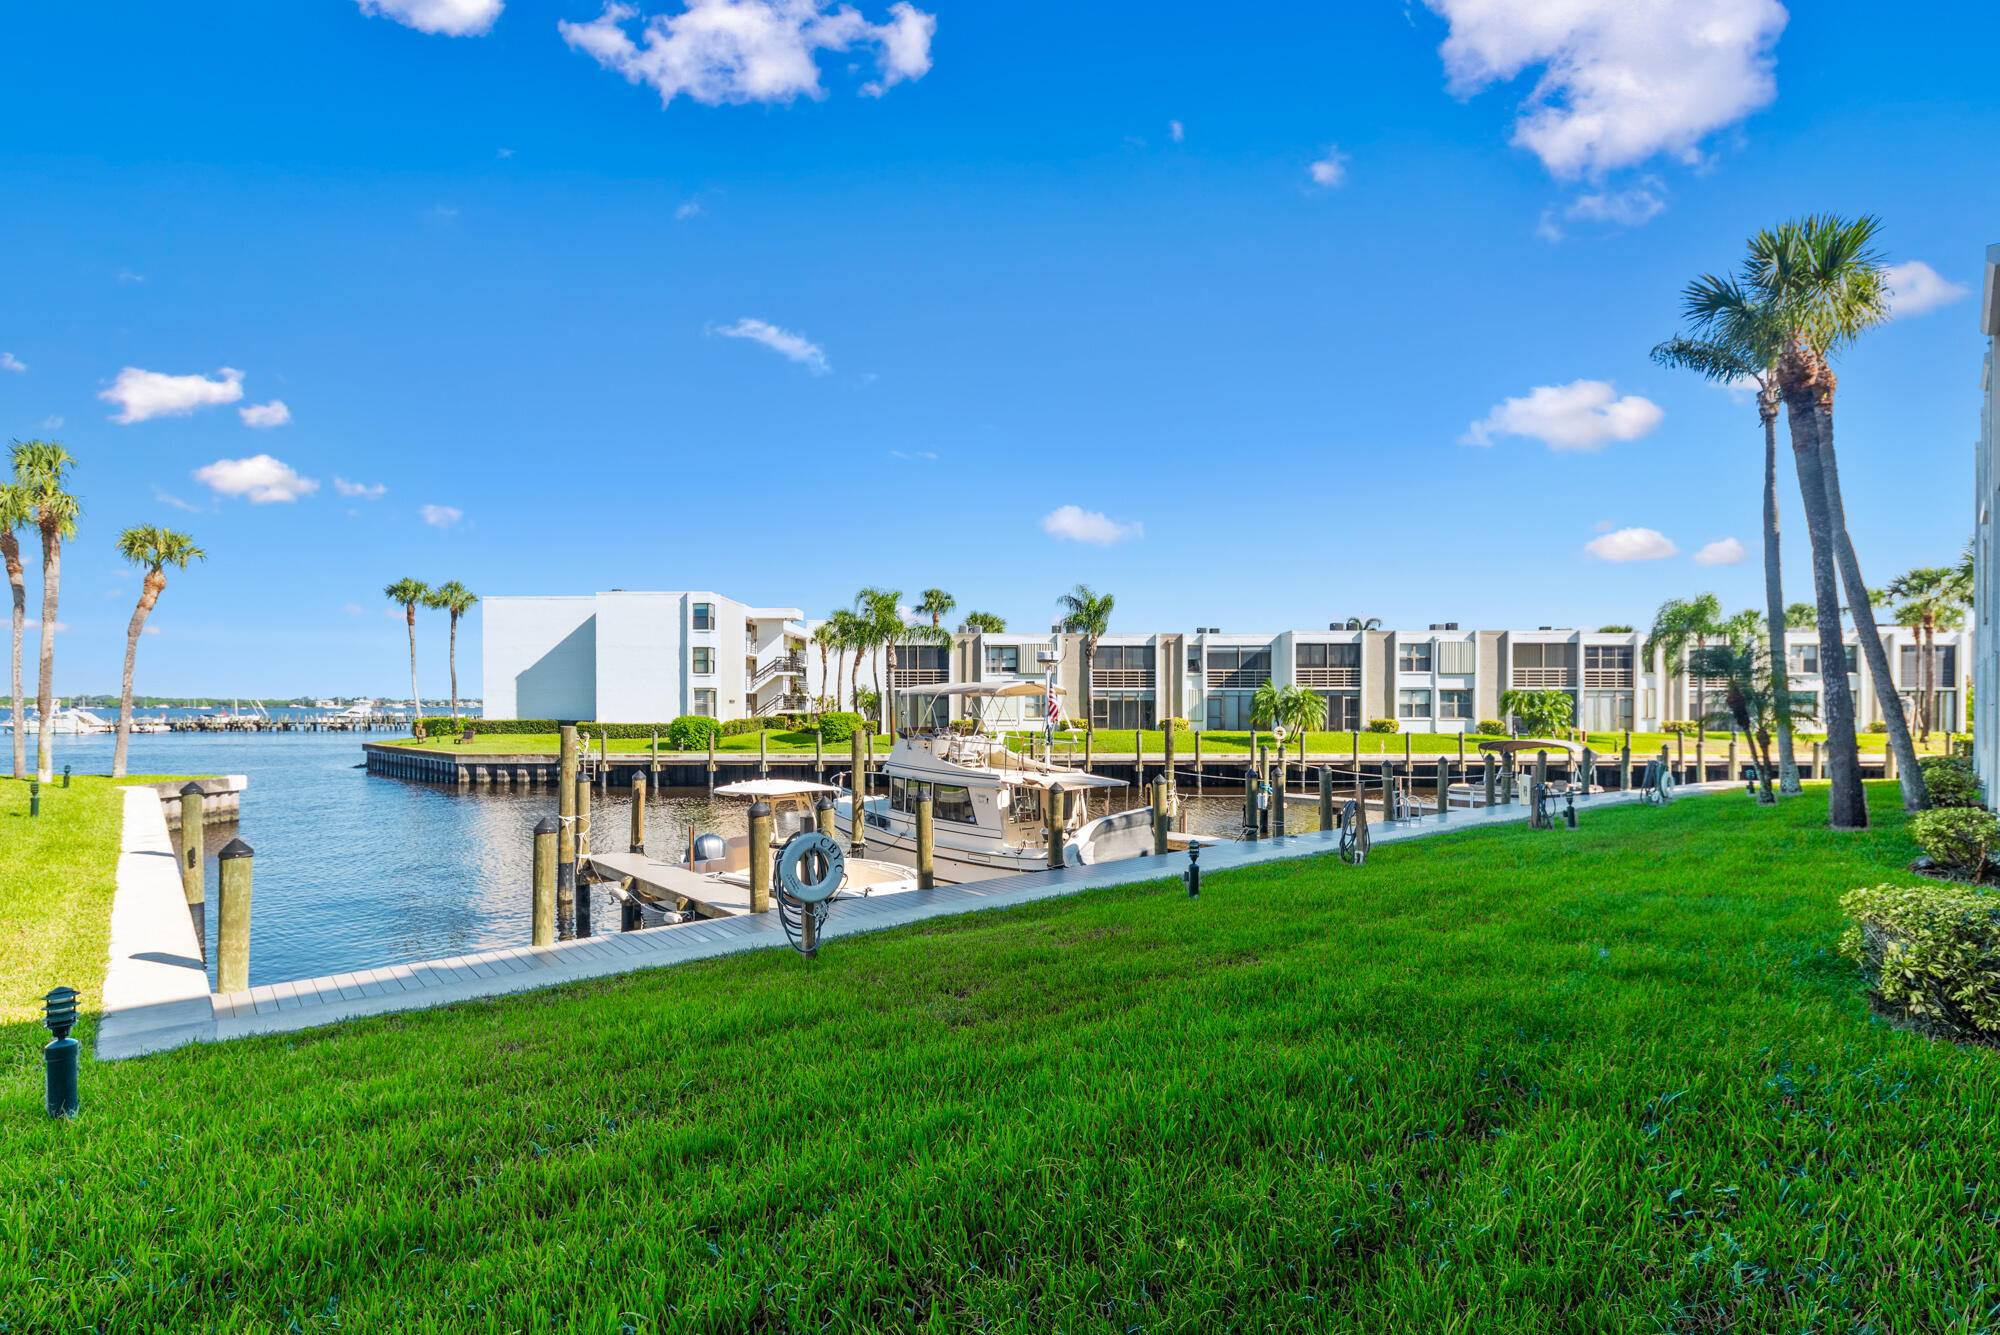 Fantastic Opportunity to own this first floor 2 bed 2 bath condo with a beautiful wide water view in one of the most sought after 55 boating communities in Stuart.